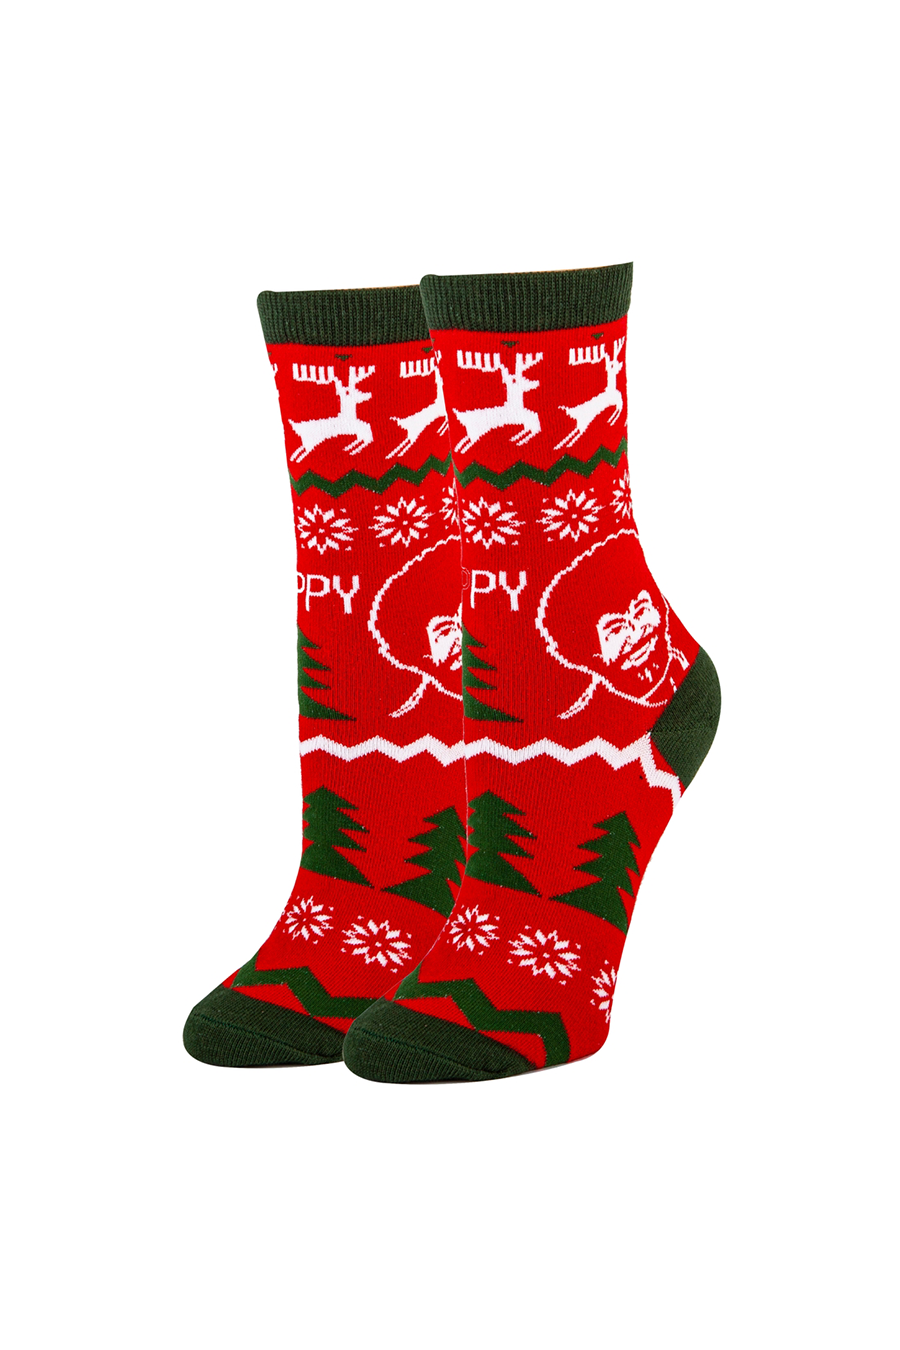 Merry Merry Bob Ross Holiday Socks - Main Image Number 2 of 2